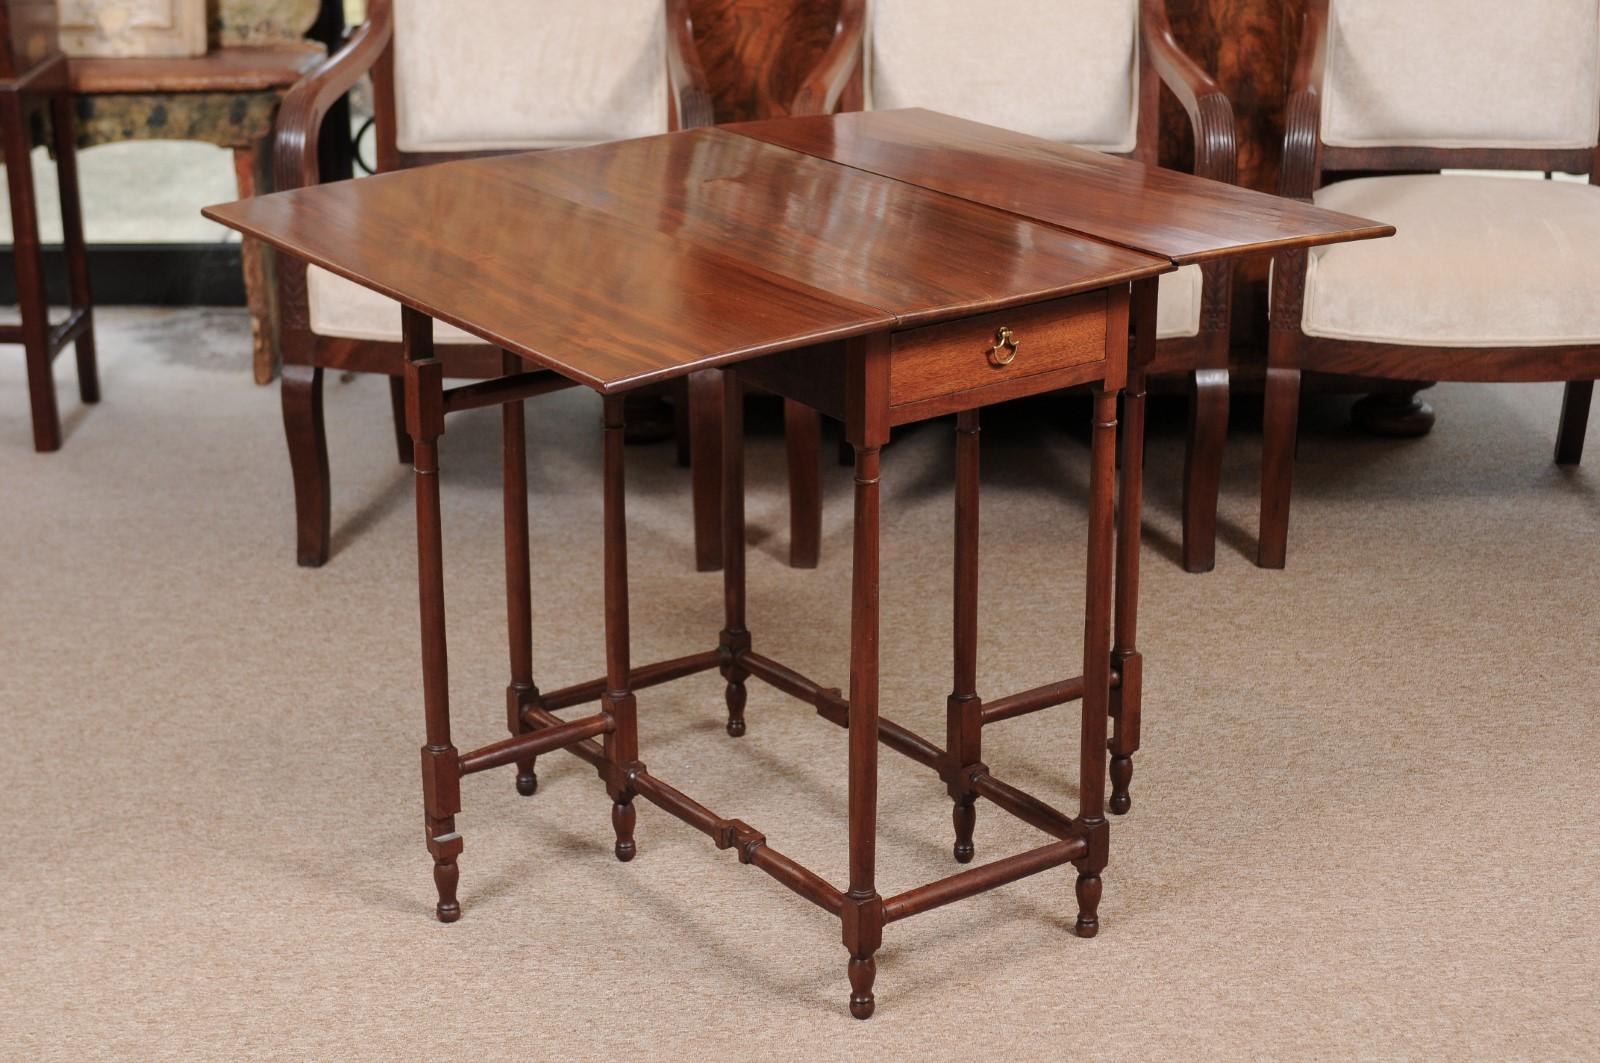 19th Century English Mahogany Spider Leg Table with Drop Leaves For Sale 2